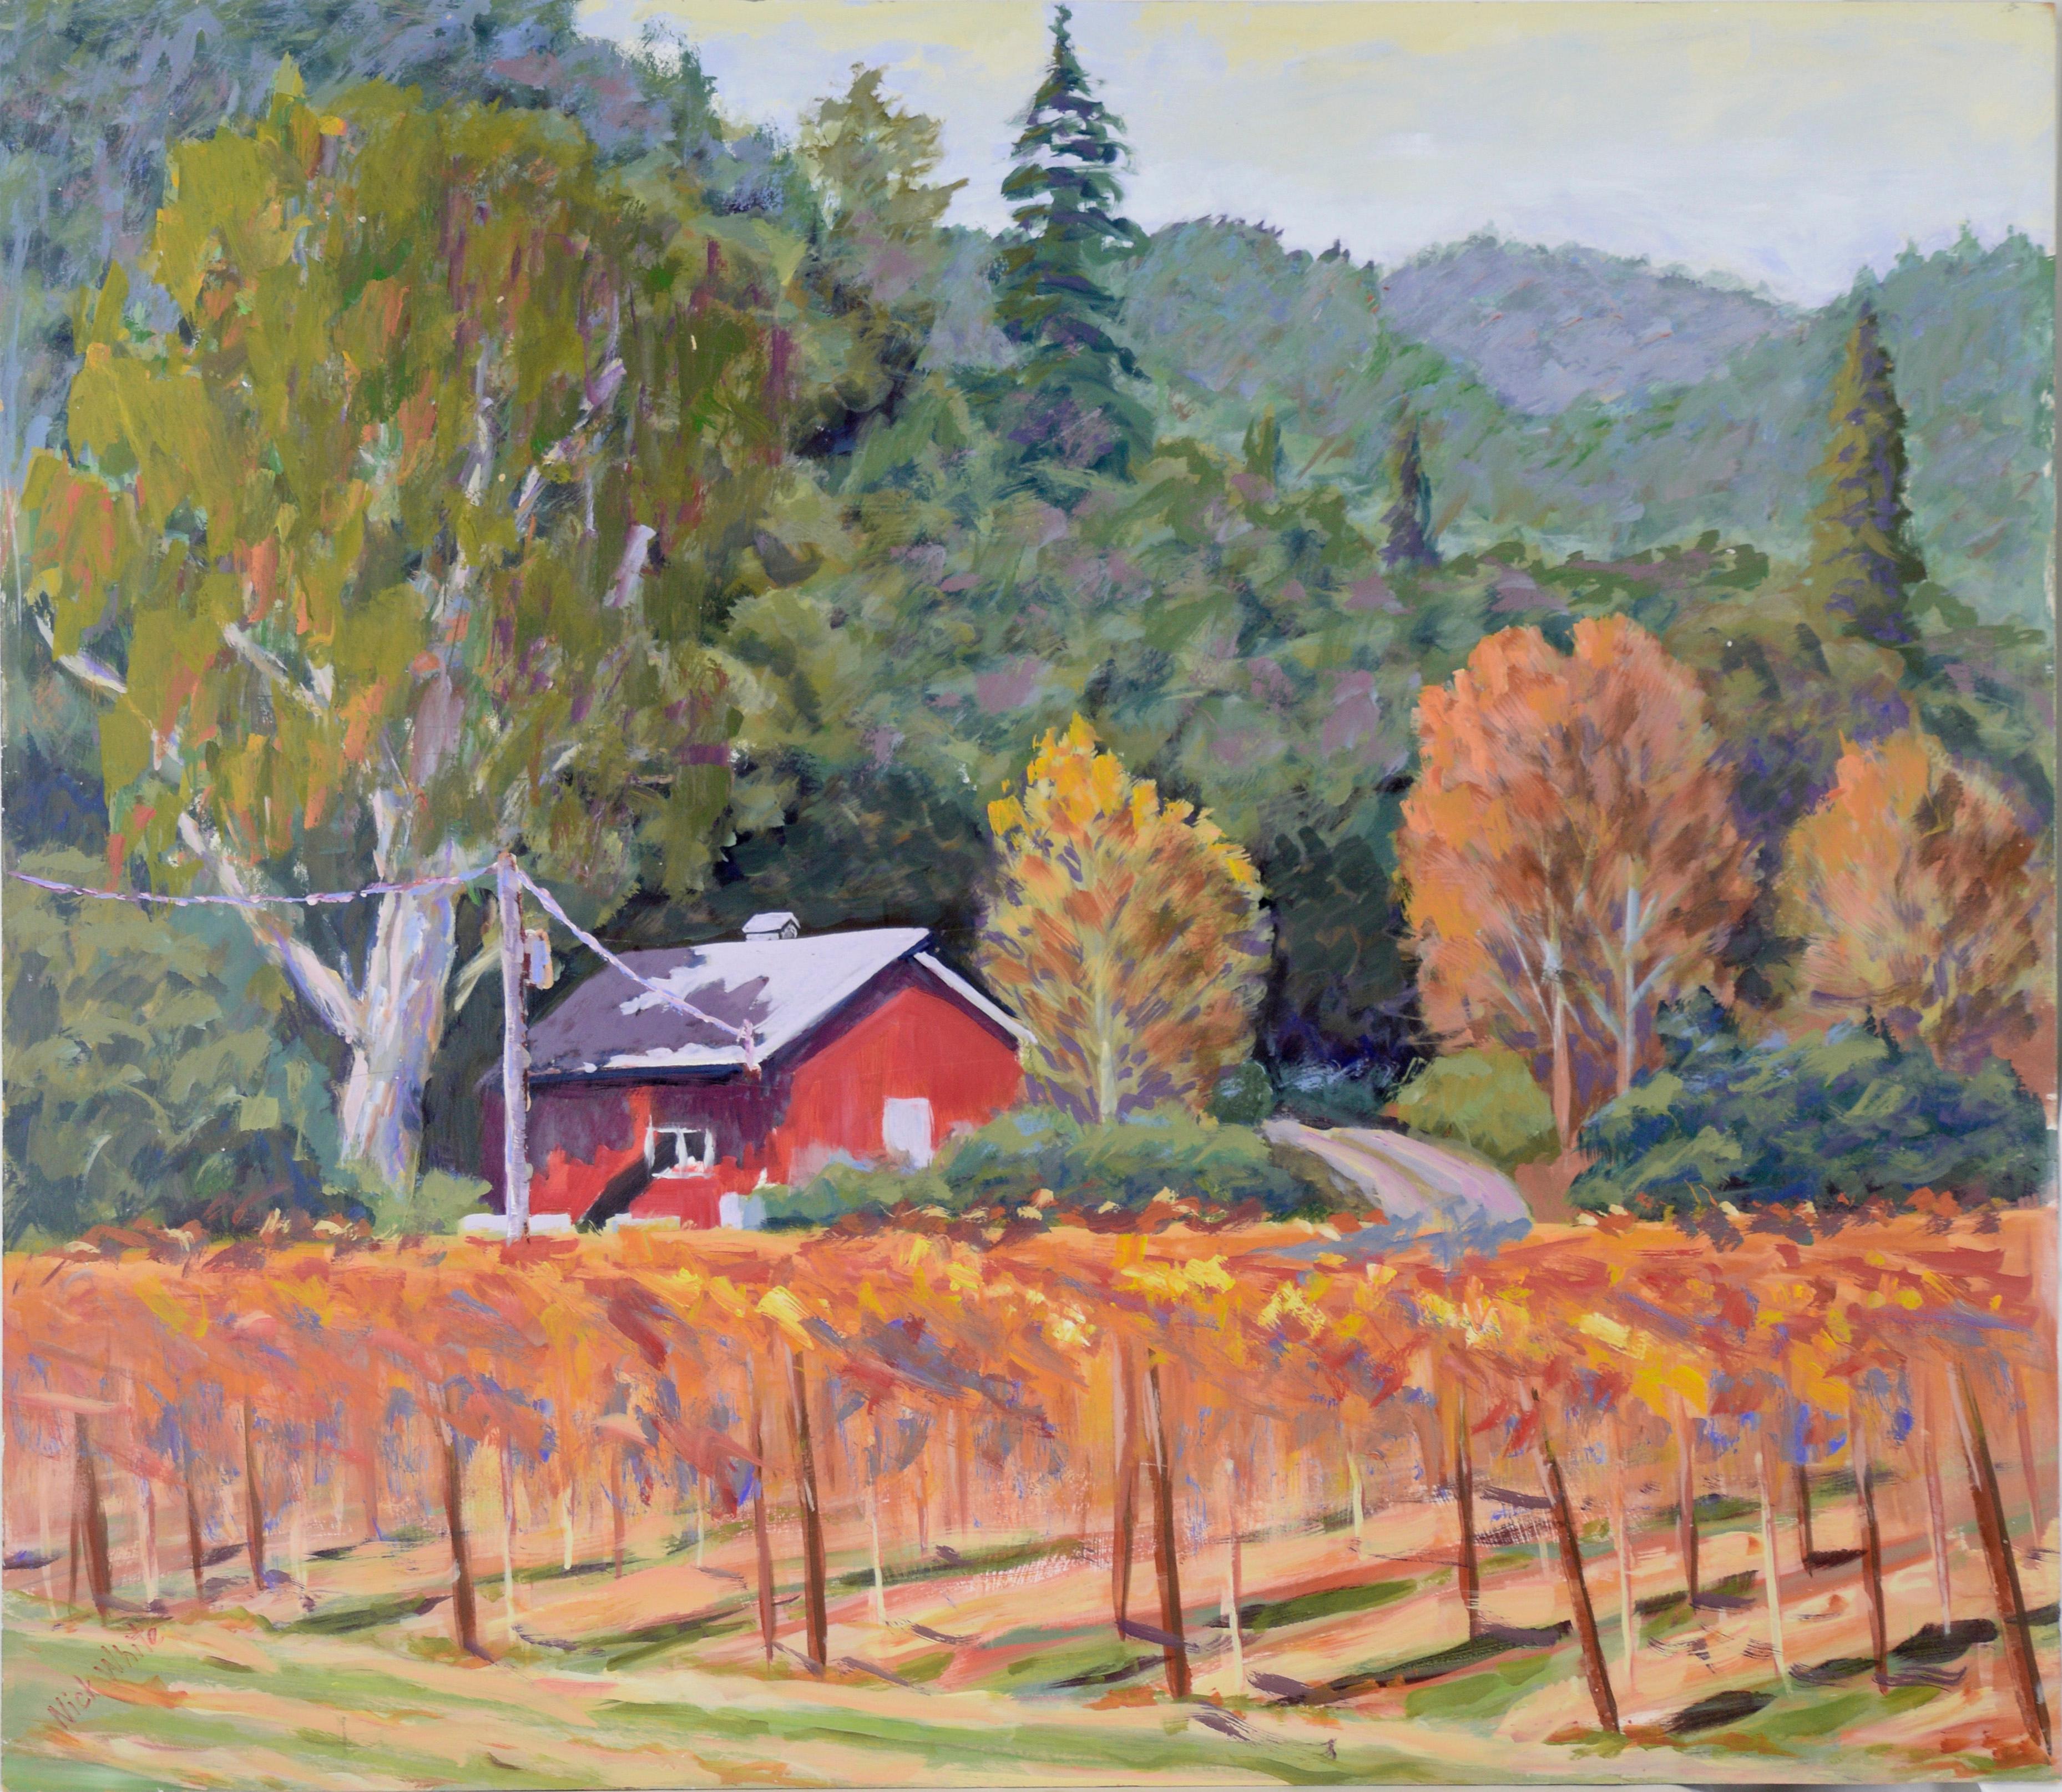 Nick White Animal Painting - Red Farmhouse in a Vineyard - Horse in Rocky Meadow on Reverse Acrylic on Board